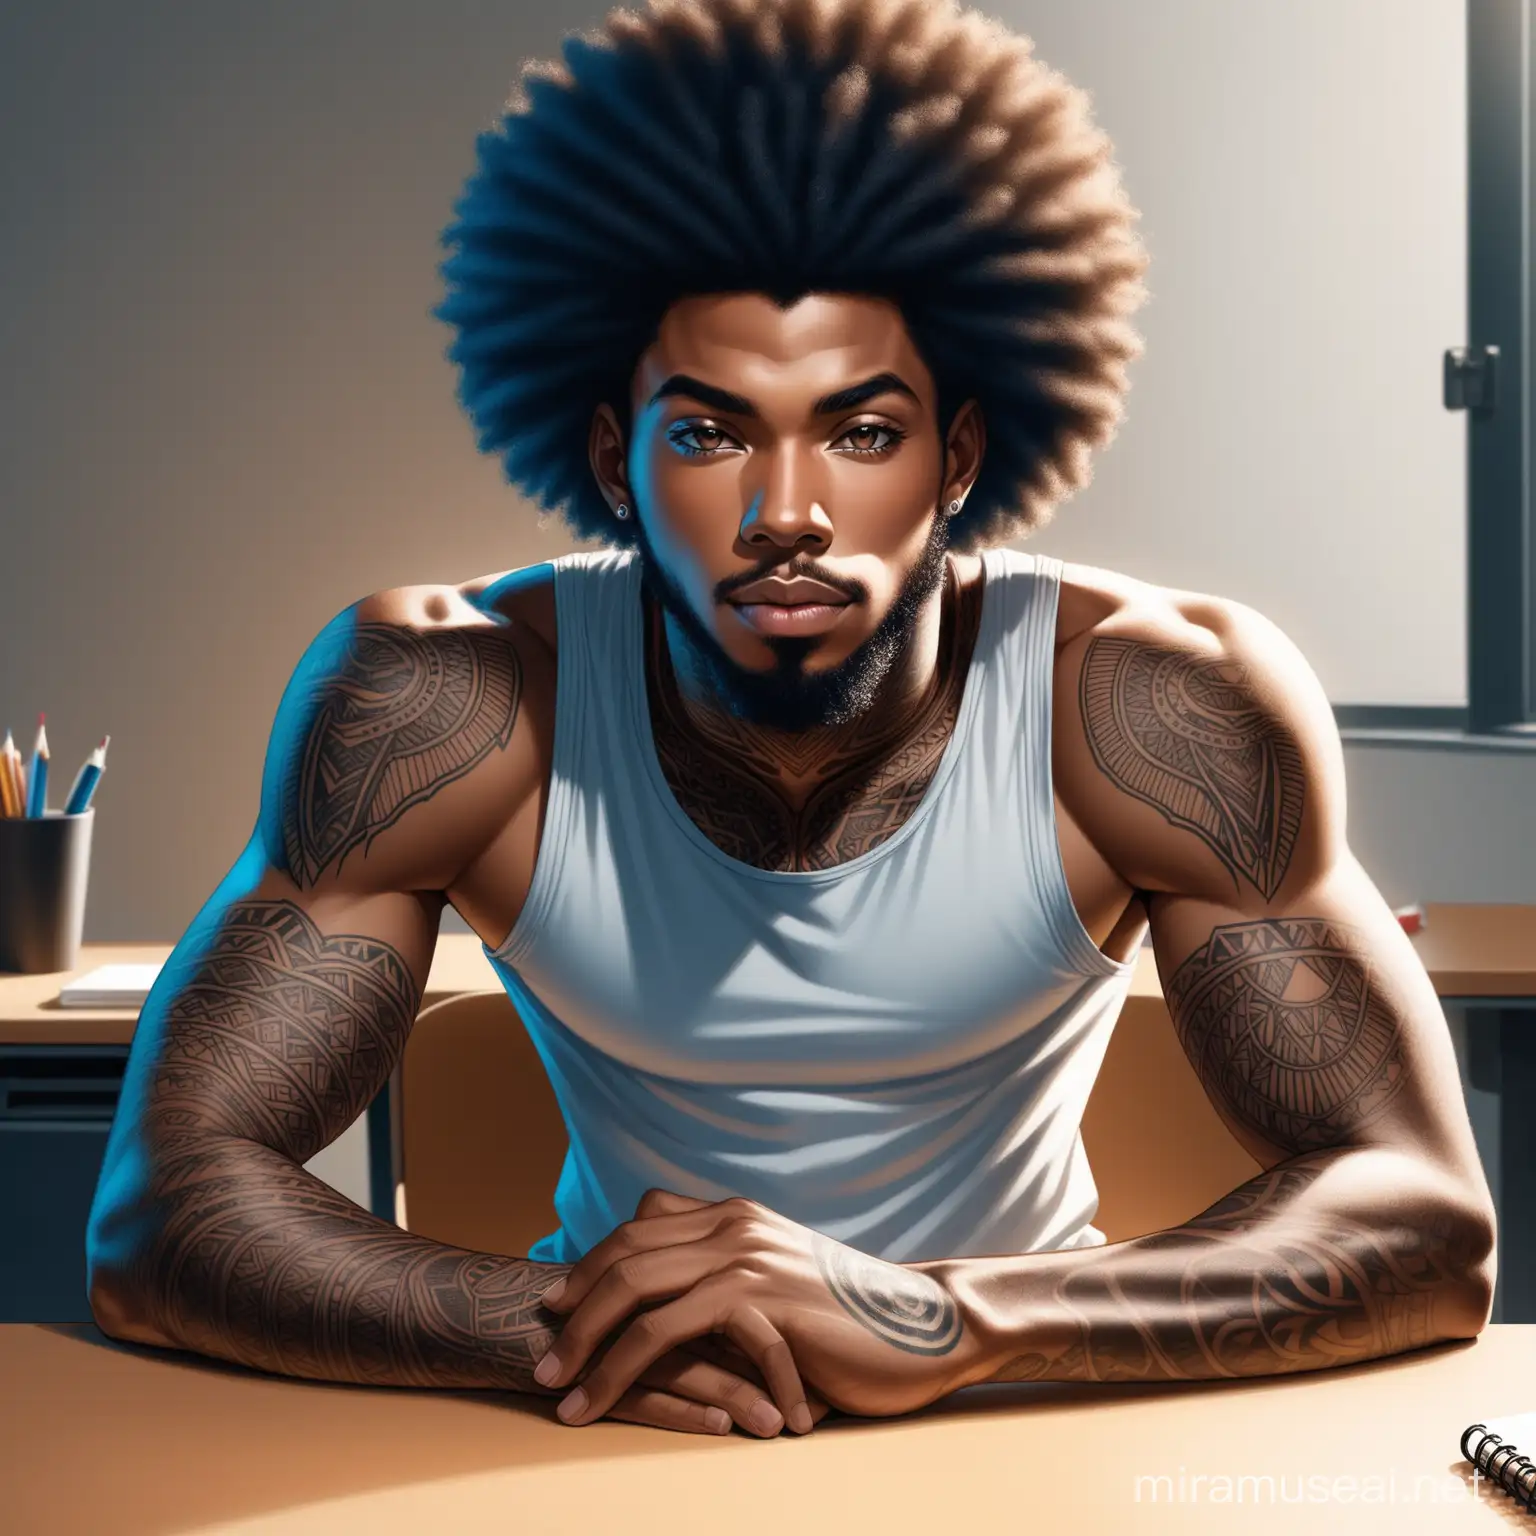 Hyper Realistic African American Man in White Tank Top at Desk